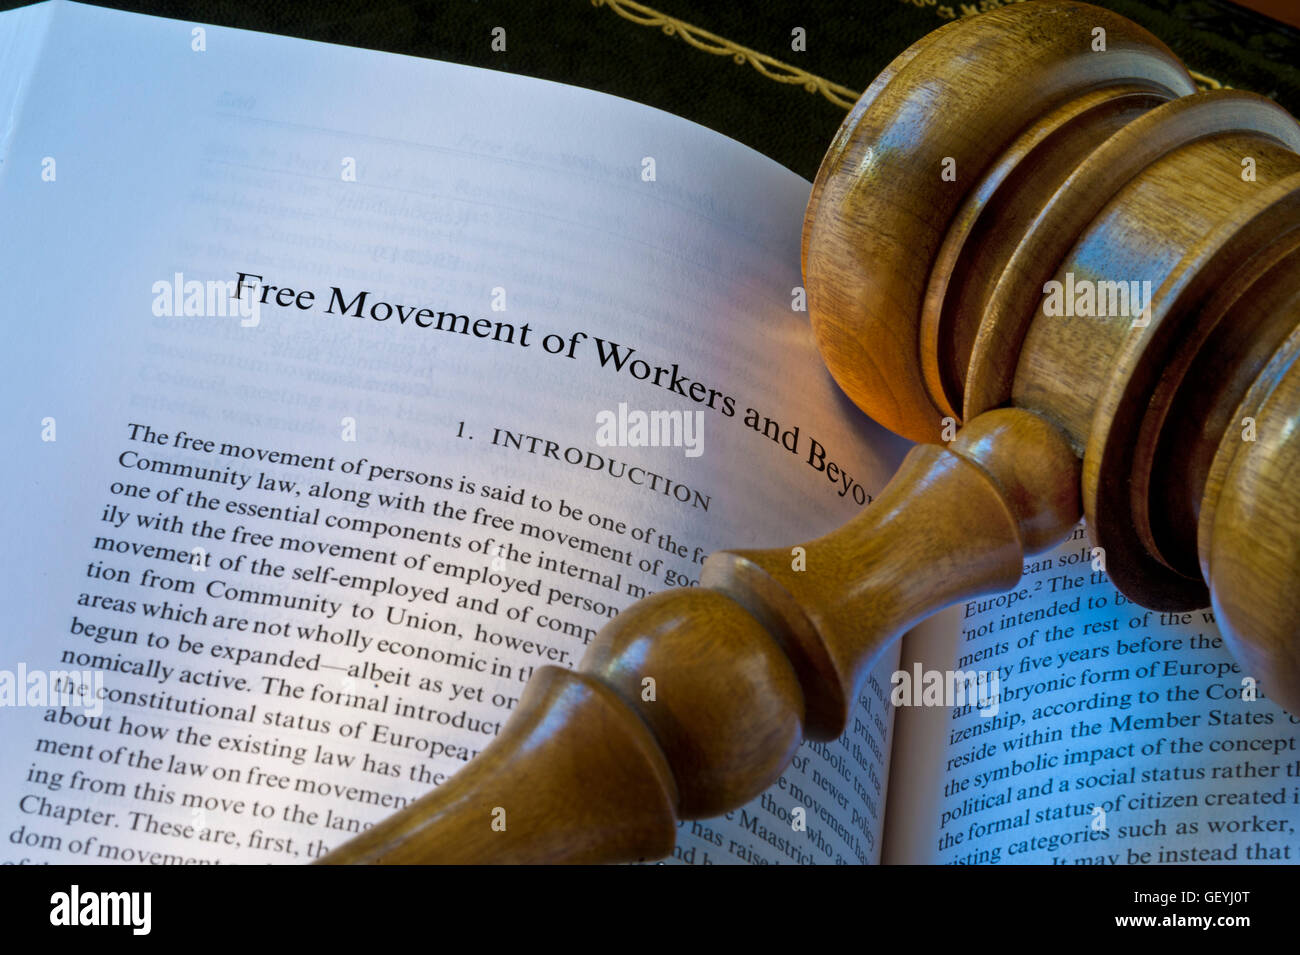 BREXIT Concept image of open EU reference Law book on desk with judges gavel on page reference to 'Free movement of workers and beyond' Stock Photo